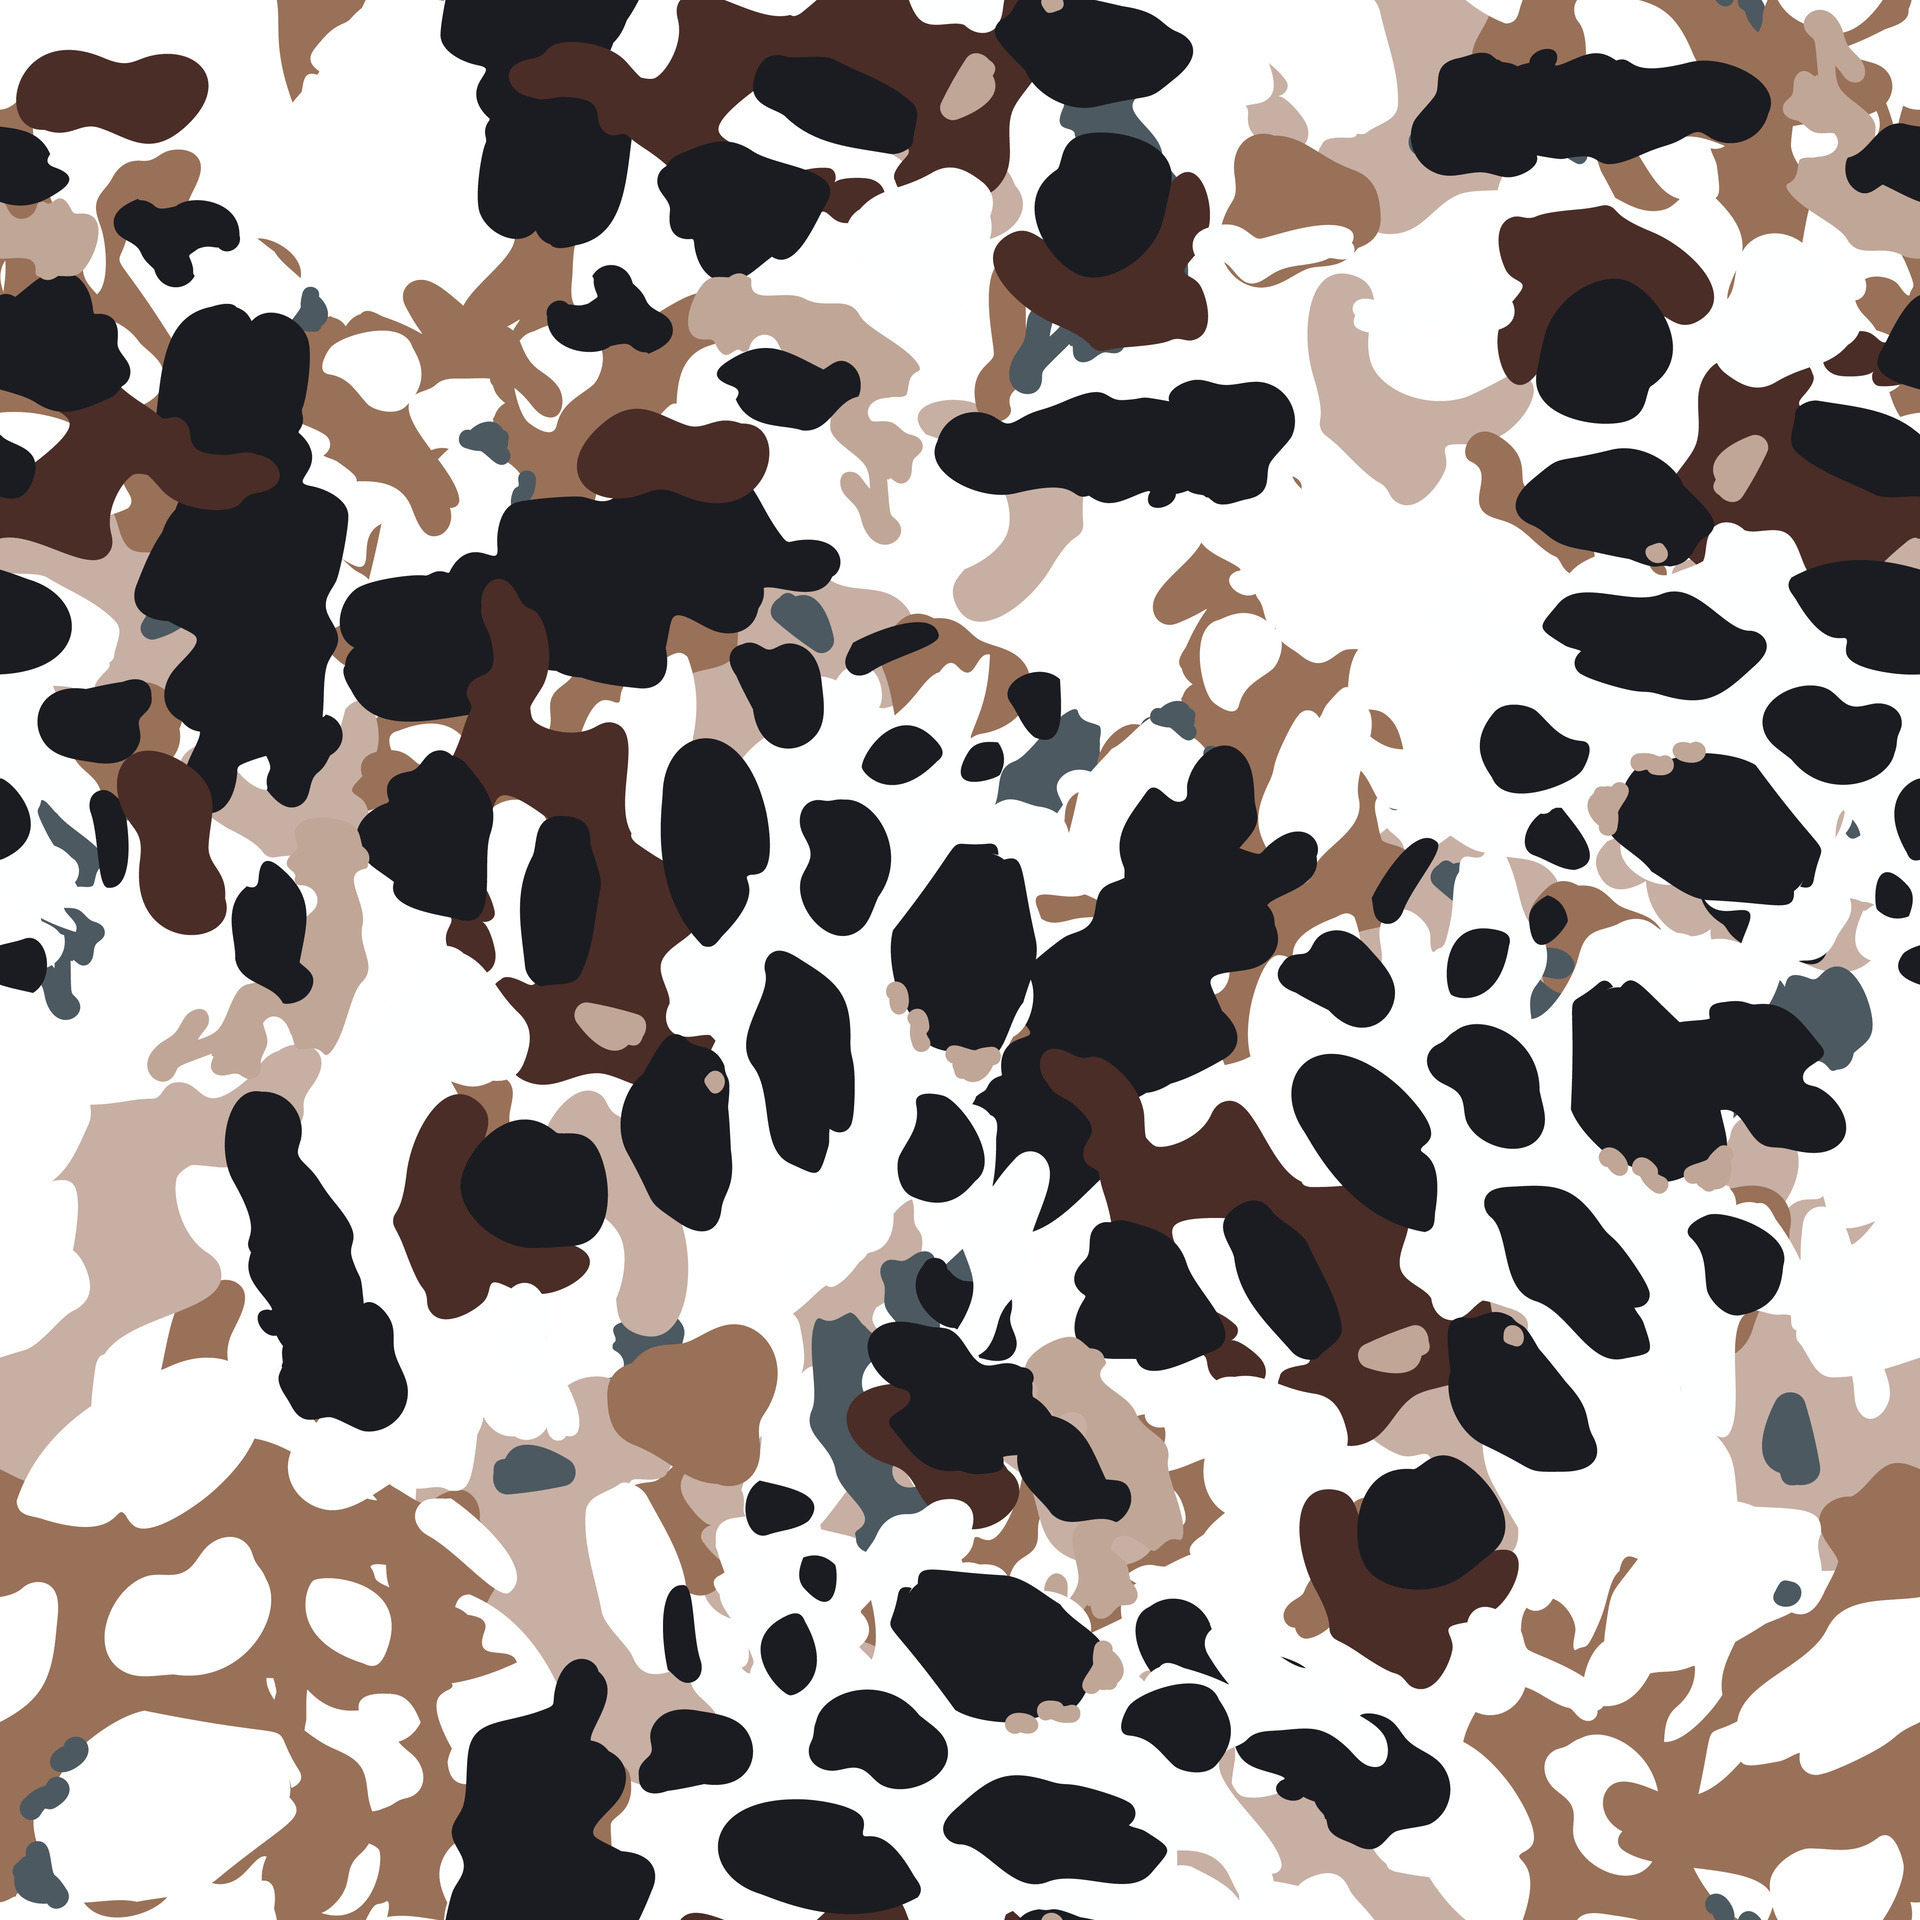 https://static.vecteezy.com/system/resources/previews/027/978/942/original/creative-abstract-leopard-skin-seamless-pattern-textured-camouflage-background-trendy-animal-fur-wallpaper-vector.jpg